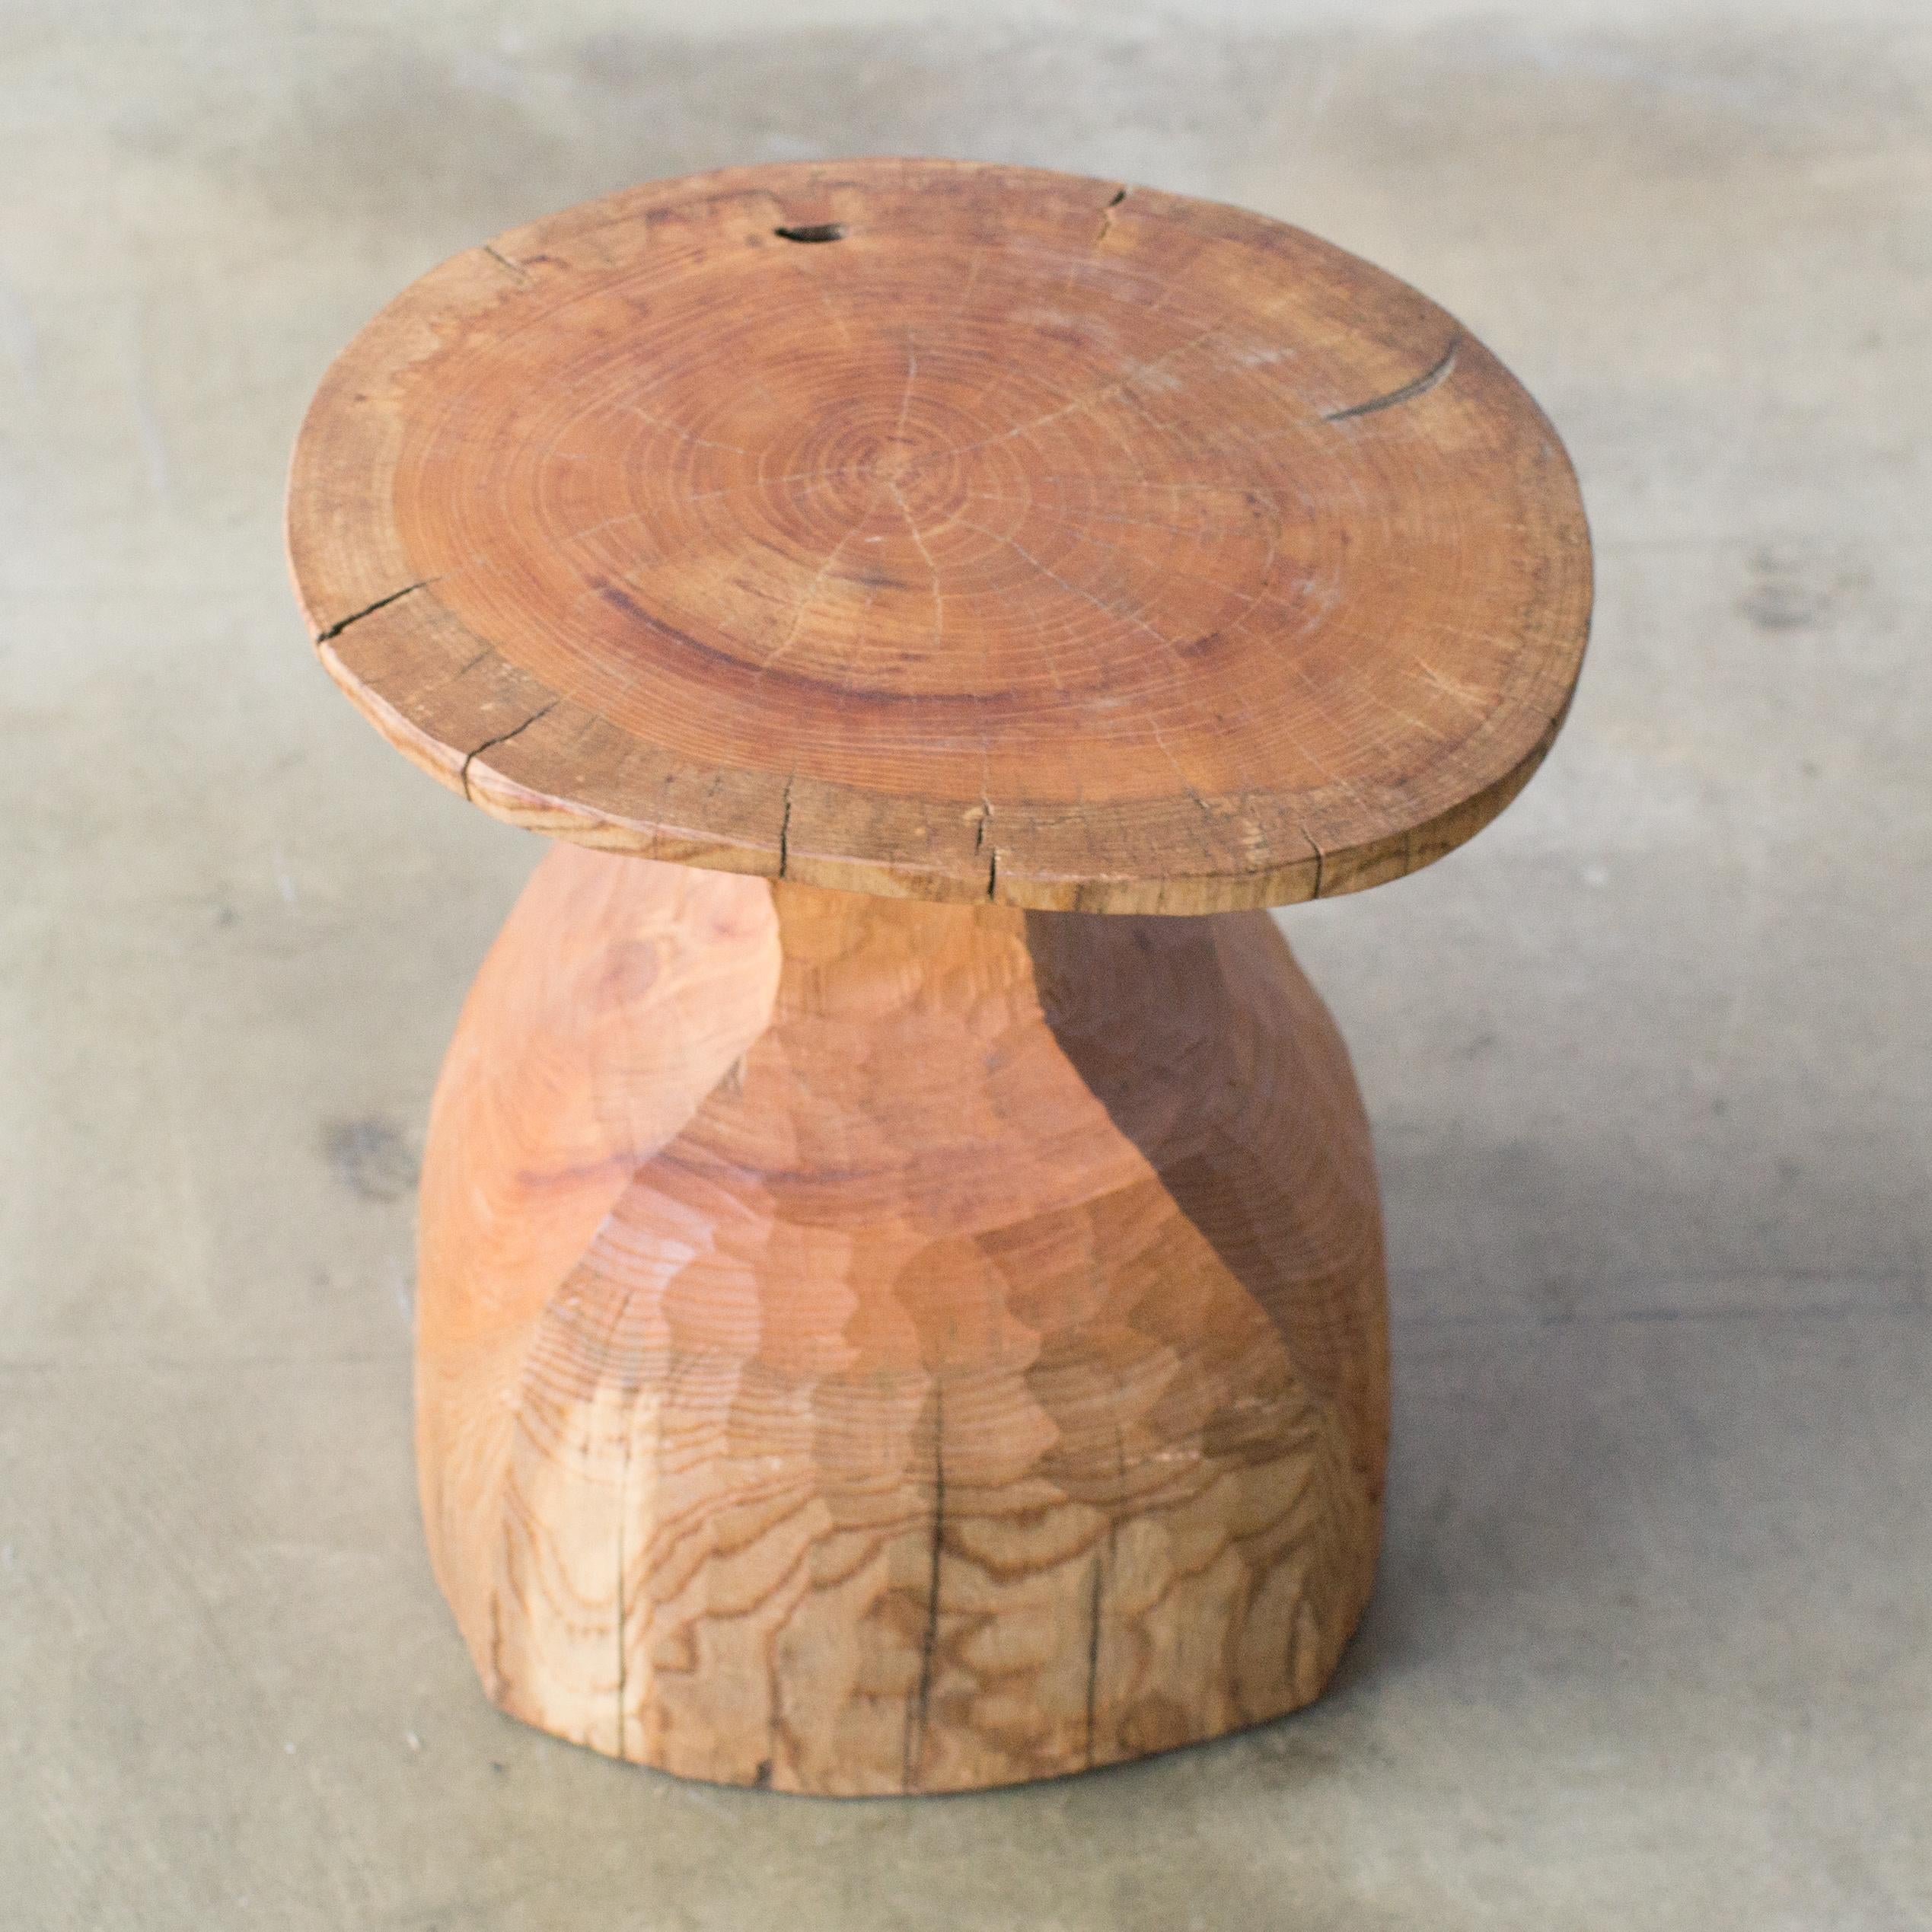 Hand-Carved Hiroyuki Nishimura and Zogei Furniture Sculptural Stool6 glamping  For Sale